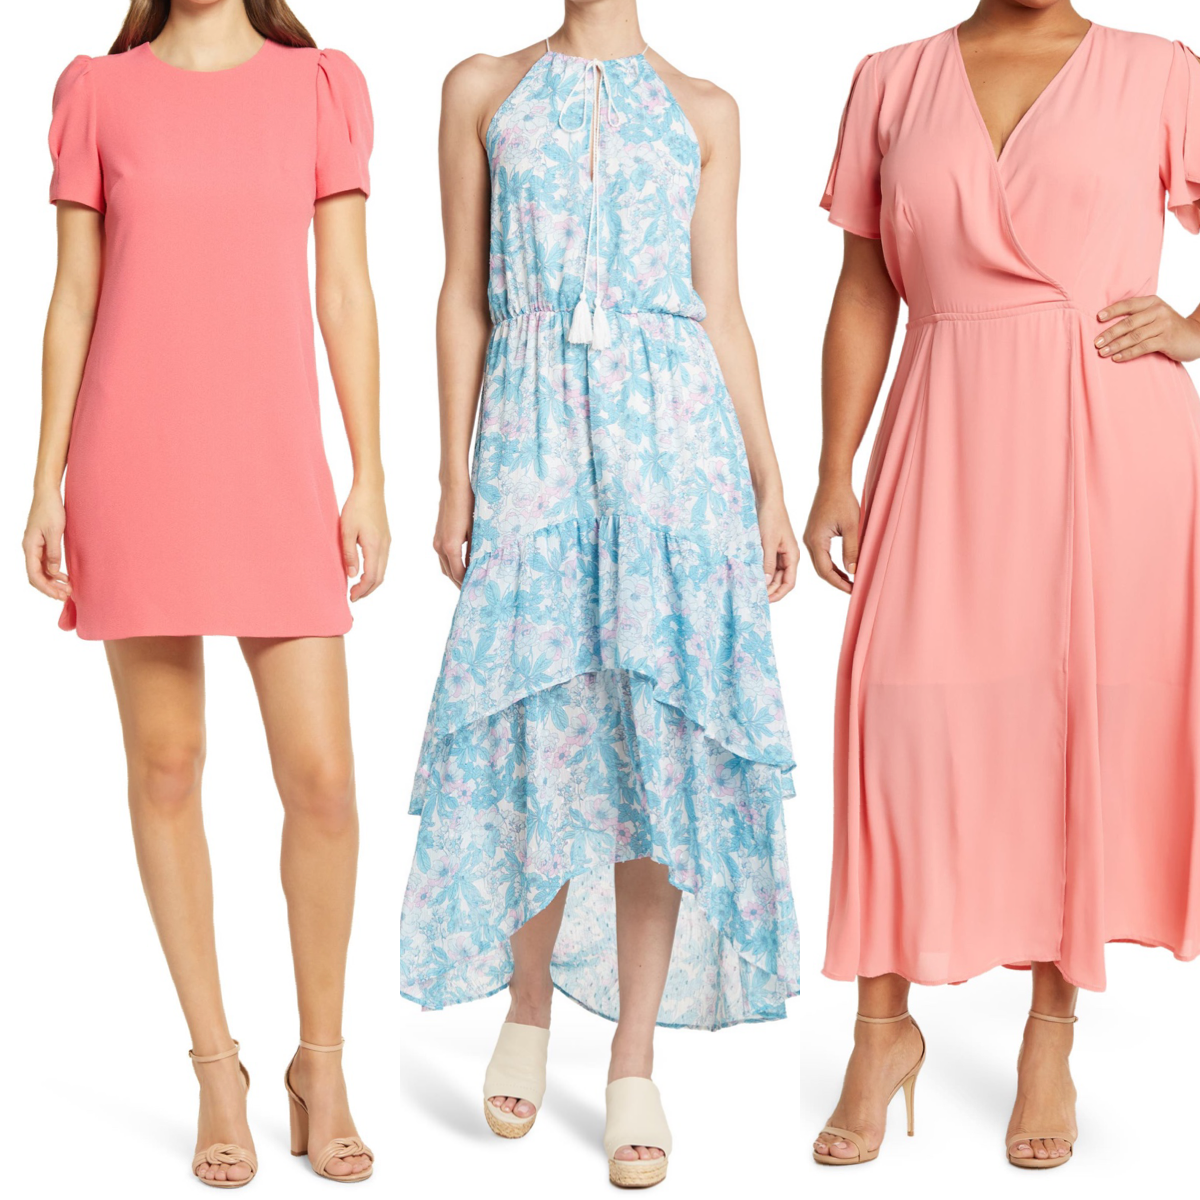 These 22 Cute Spring Dresses From Nordstrom Rack Are All Under $50